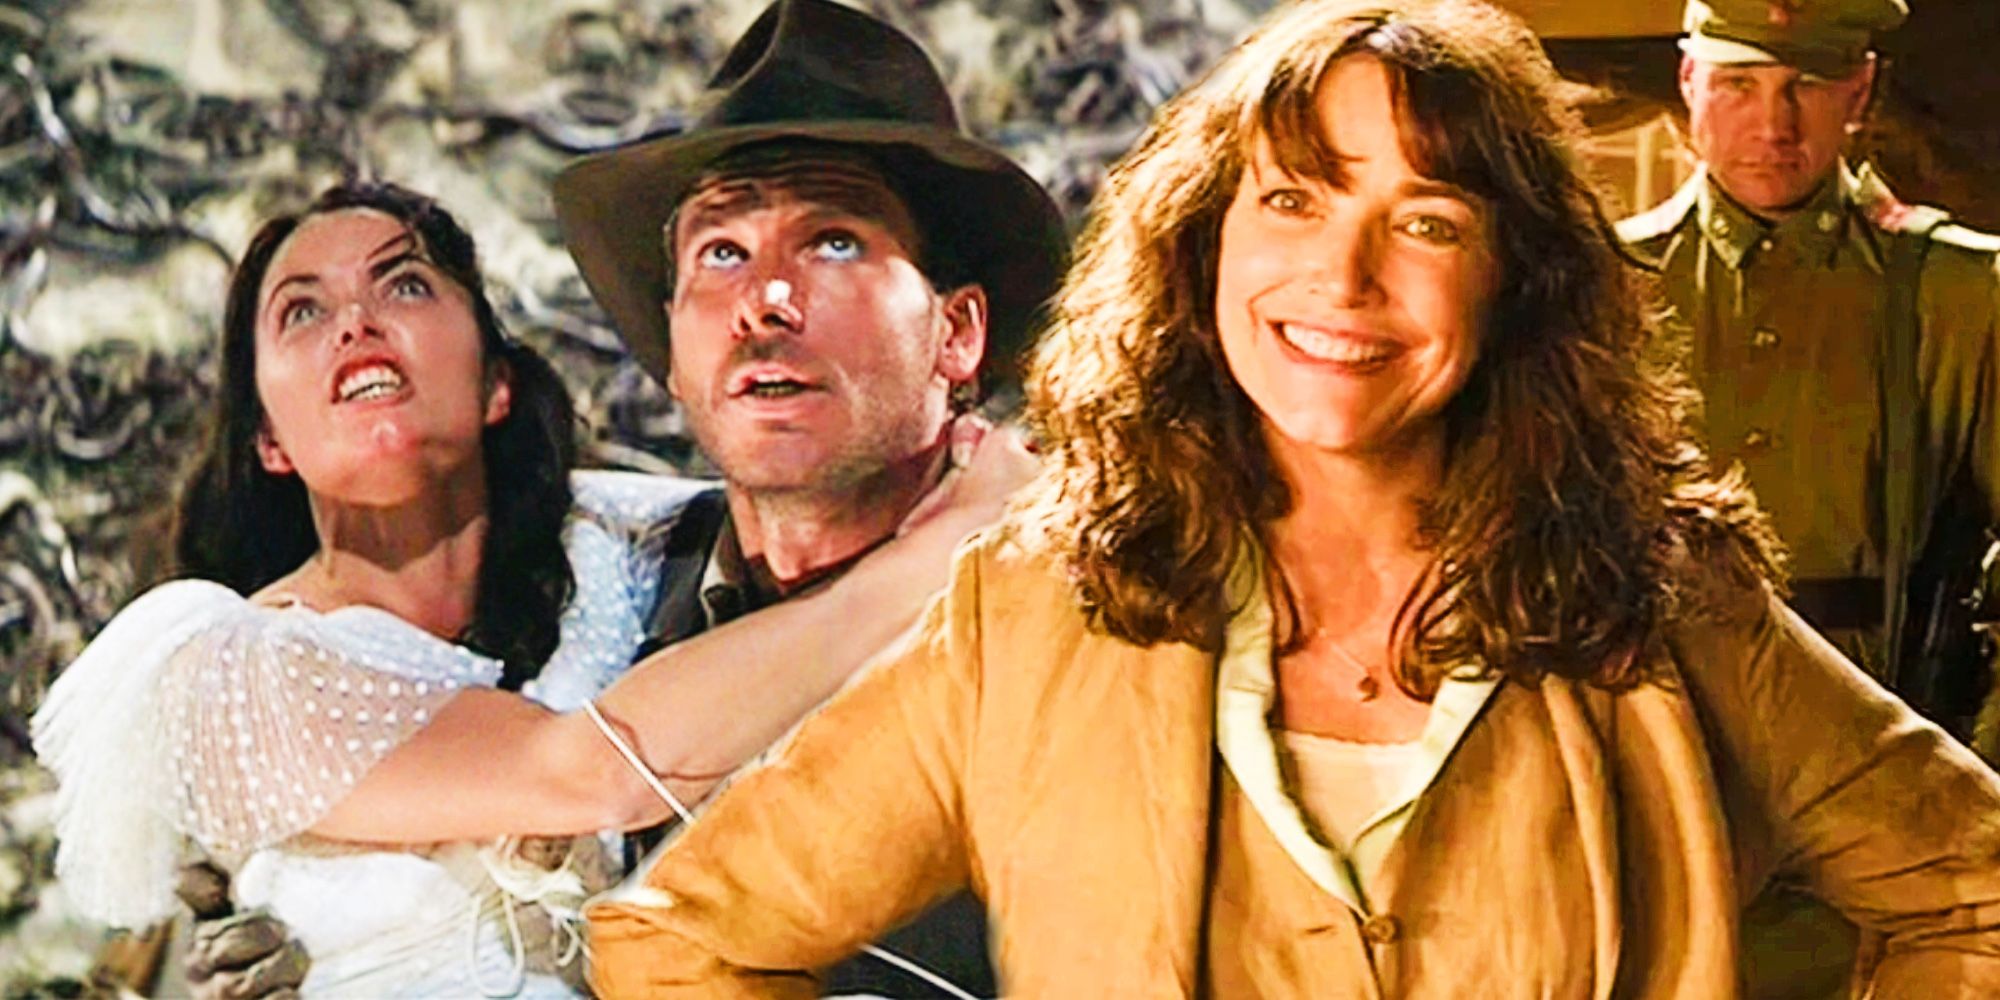 Blended image of Indiana holding Marion in Raiders of the Lost Ark and Marion smiling in Indiana Jones and the Kingdom of the Crystal Skull